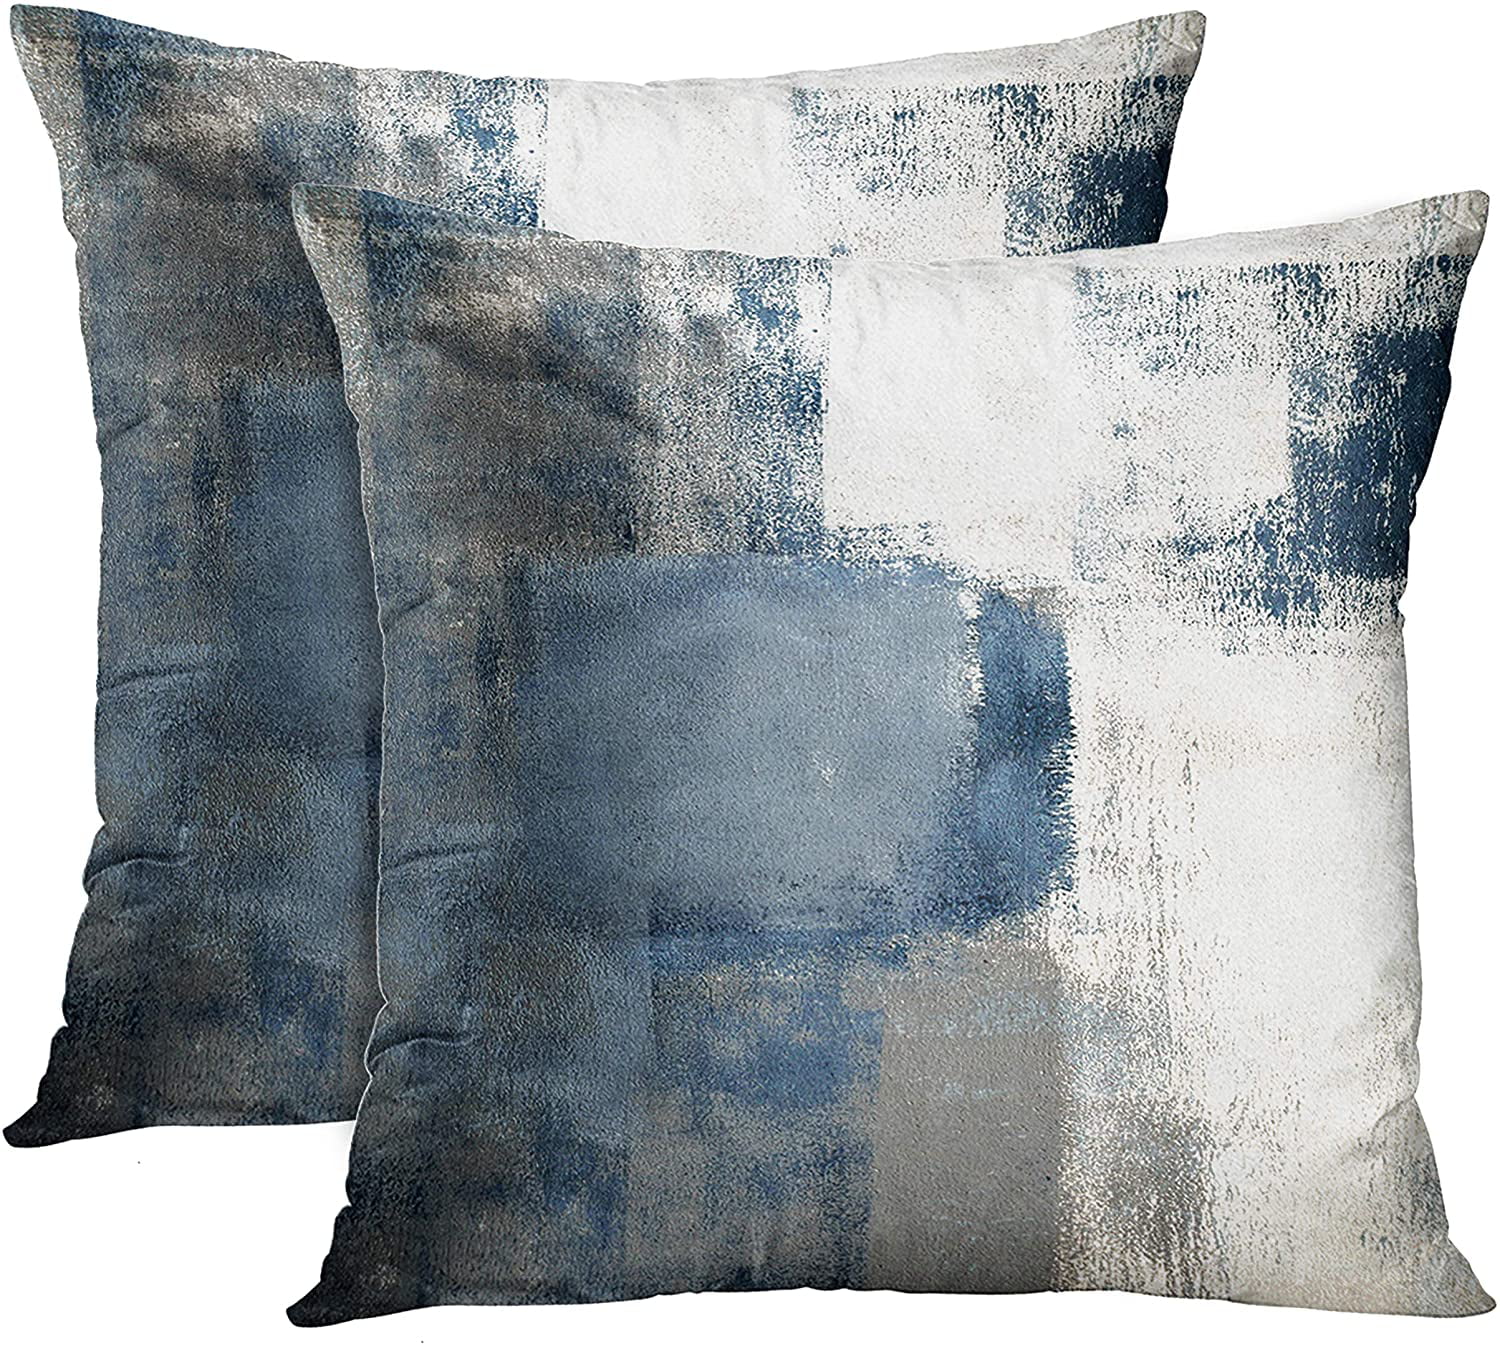 PILLOW COVER Teal Blue Decorative Home Decor Abstract Gray Cushion Case 20x20" 